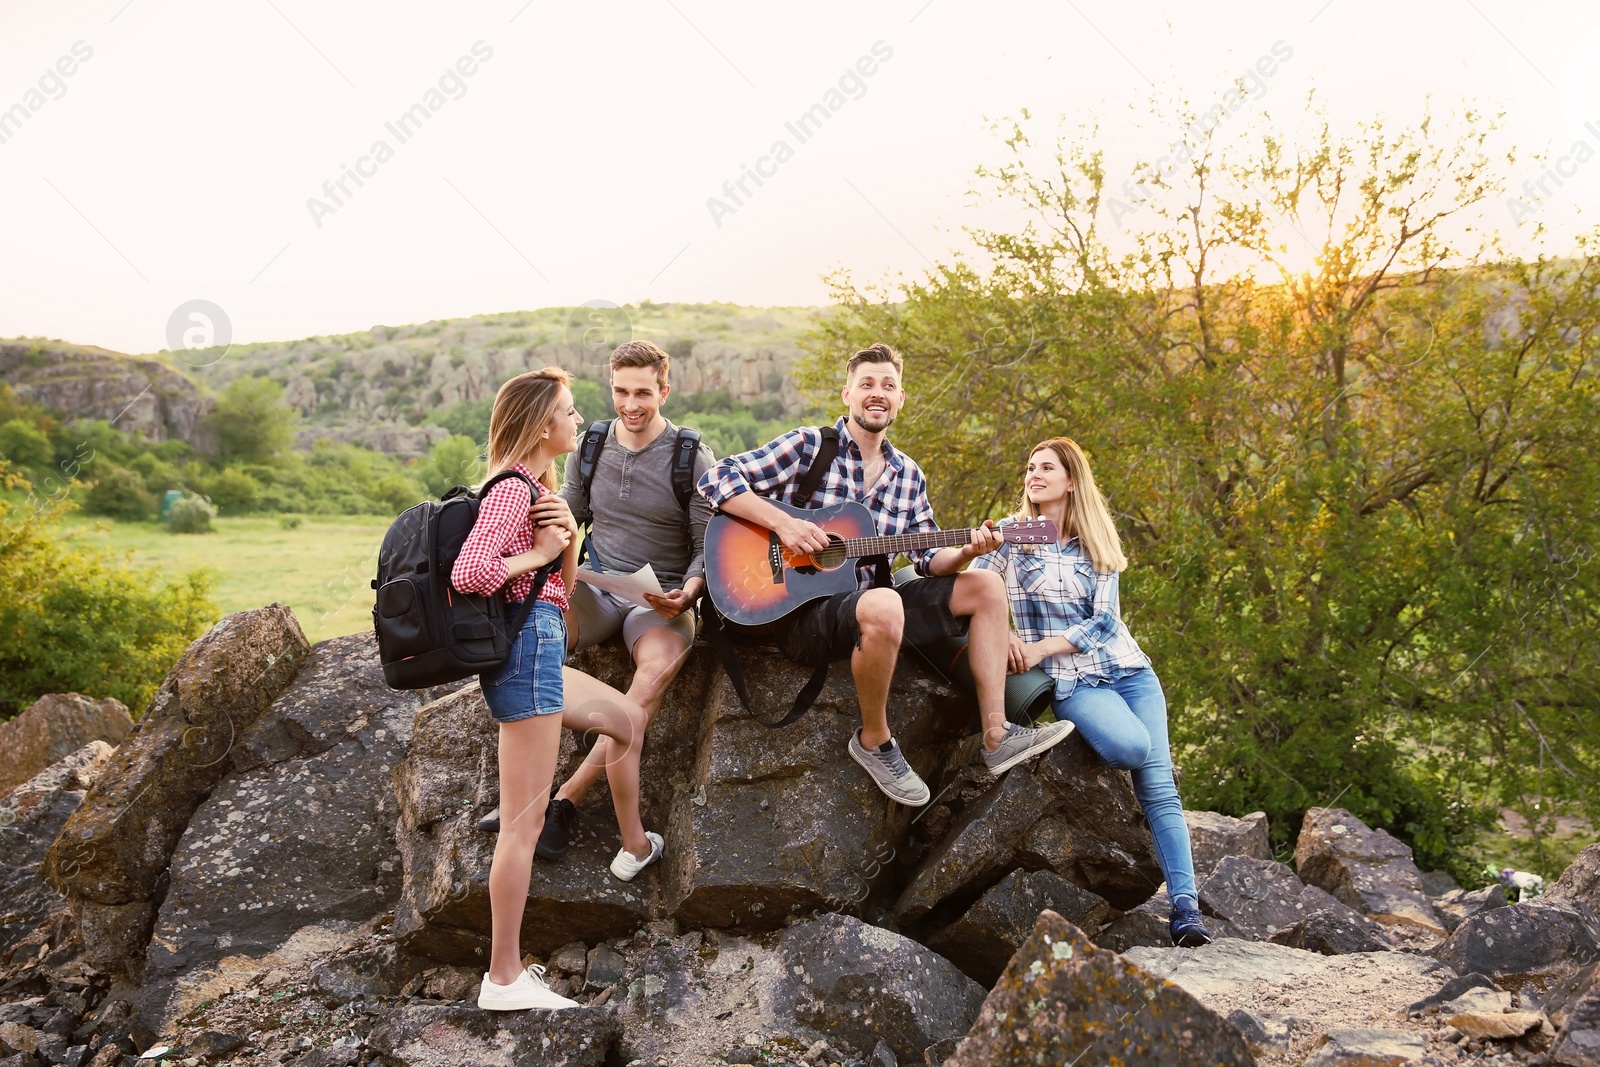 Photo of Young man with backpack playing guitar for his friends in wilderness. Camping season